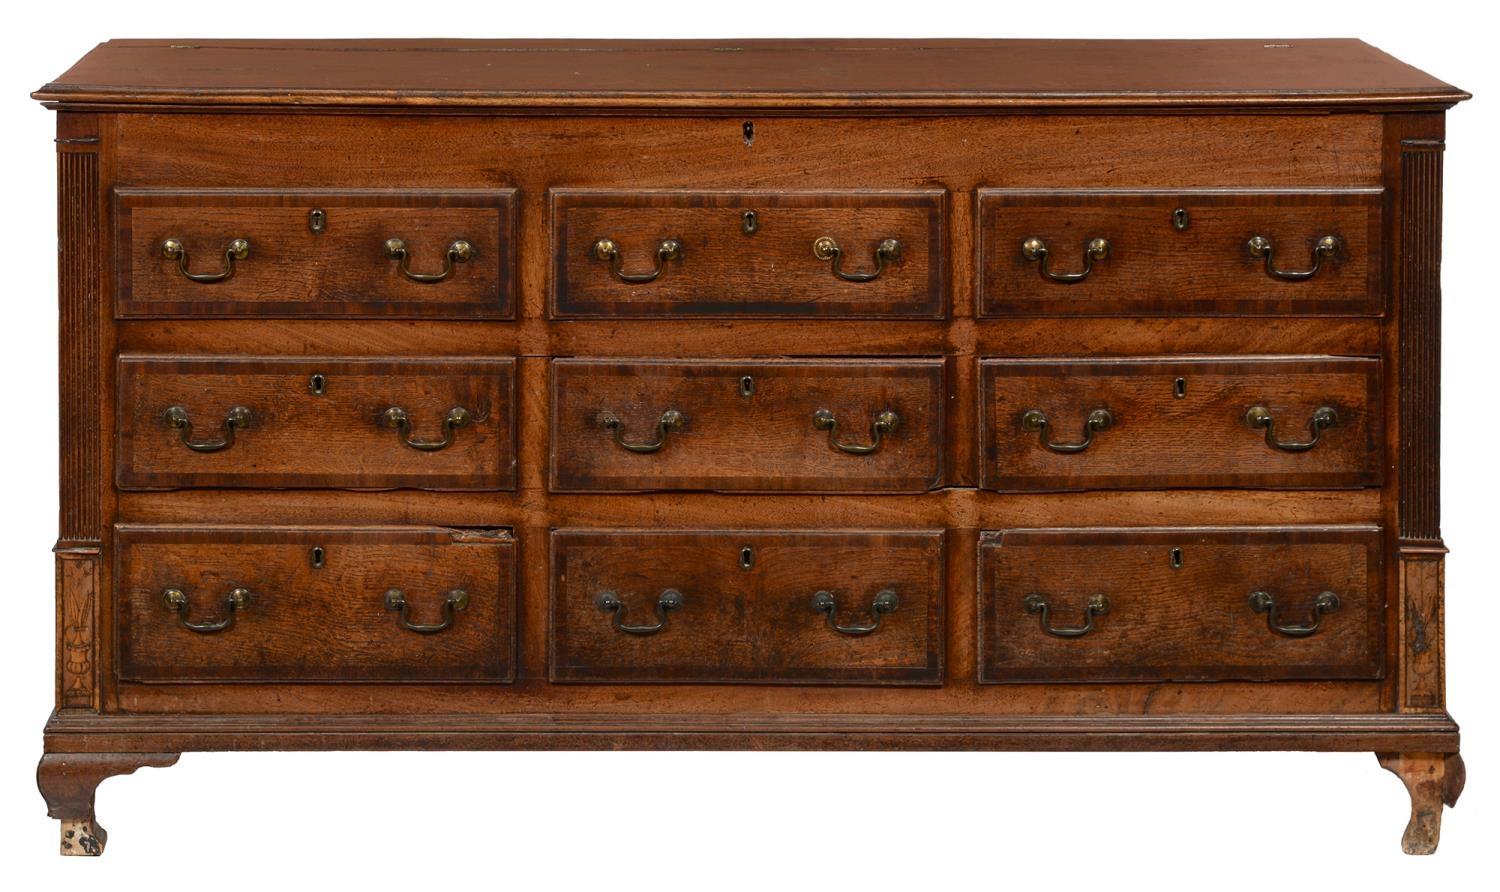 A GEORGE III OAK, CROSSBANDED AND INLAID CHEST, NORTH WEST ENGLAND, EARLY 19TH C, WITH MOULDED